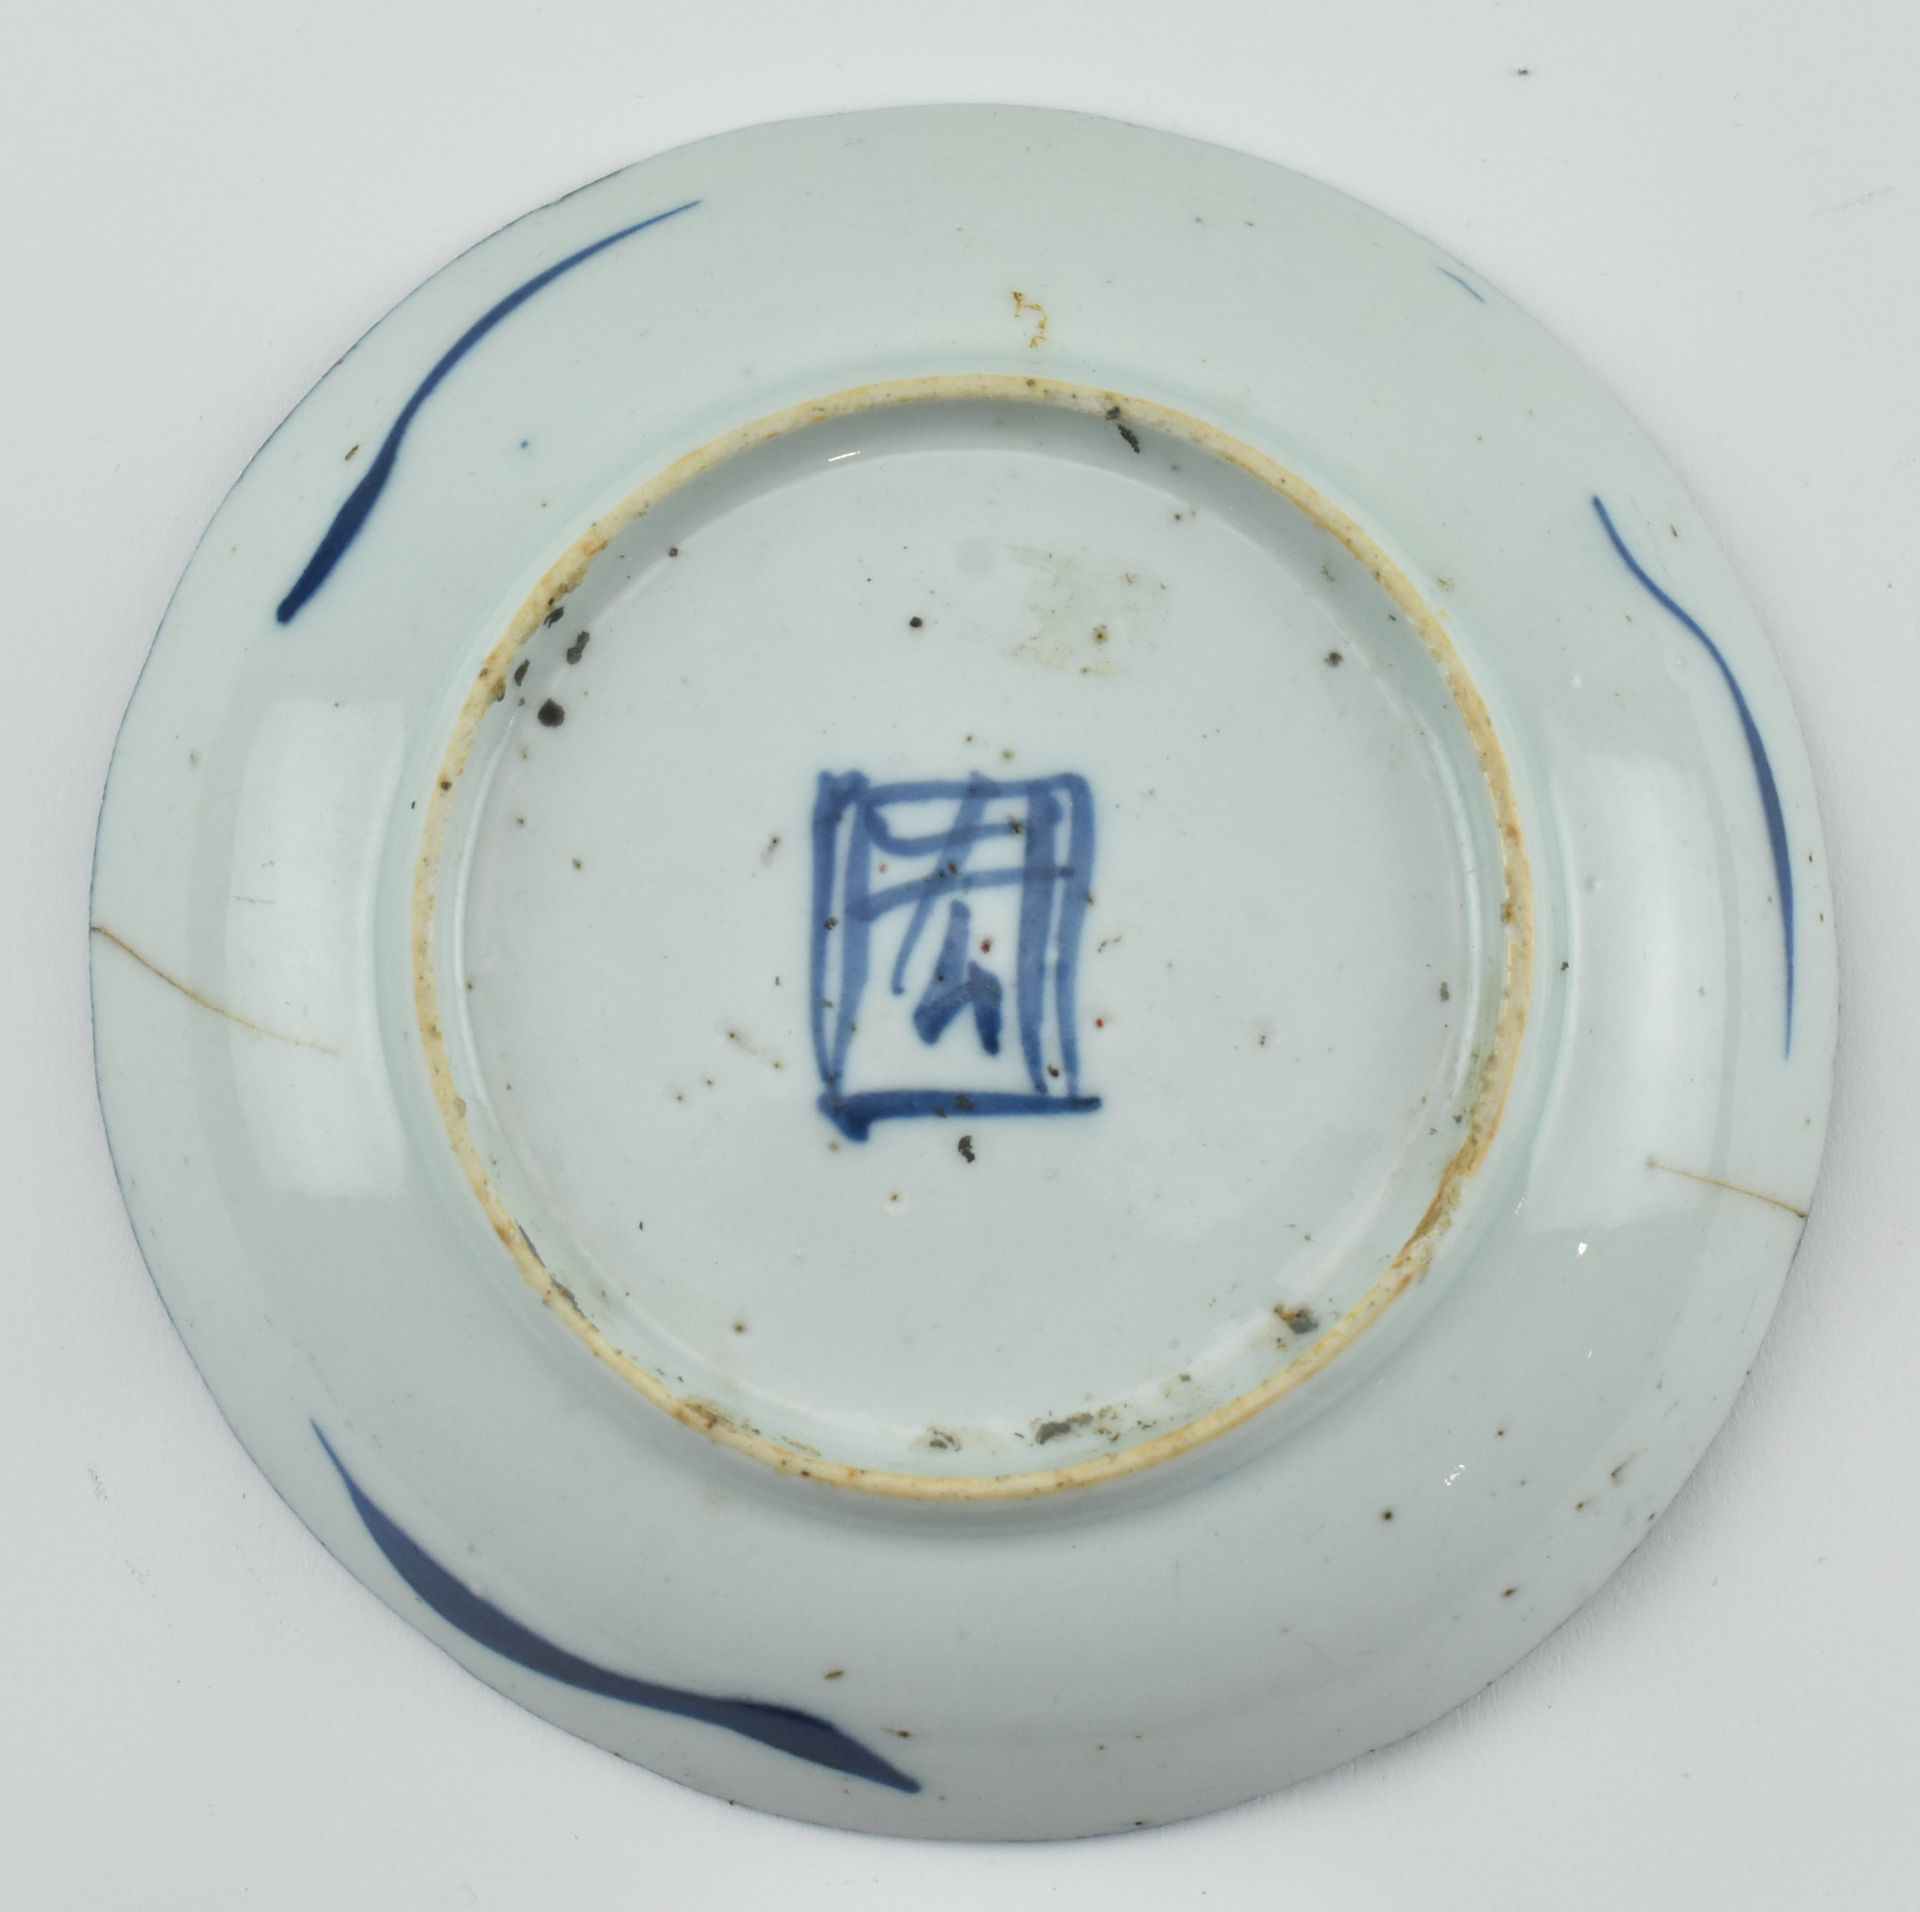 QING DAOGUANG BLUE AND WHITE PLATE 清 道光 青花山水盘 - Image 7 of 8